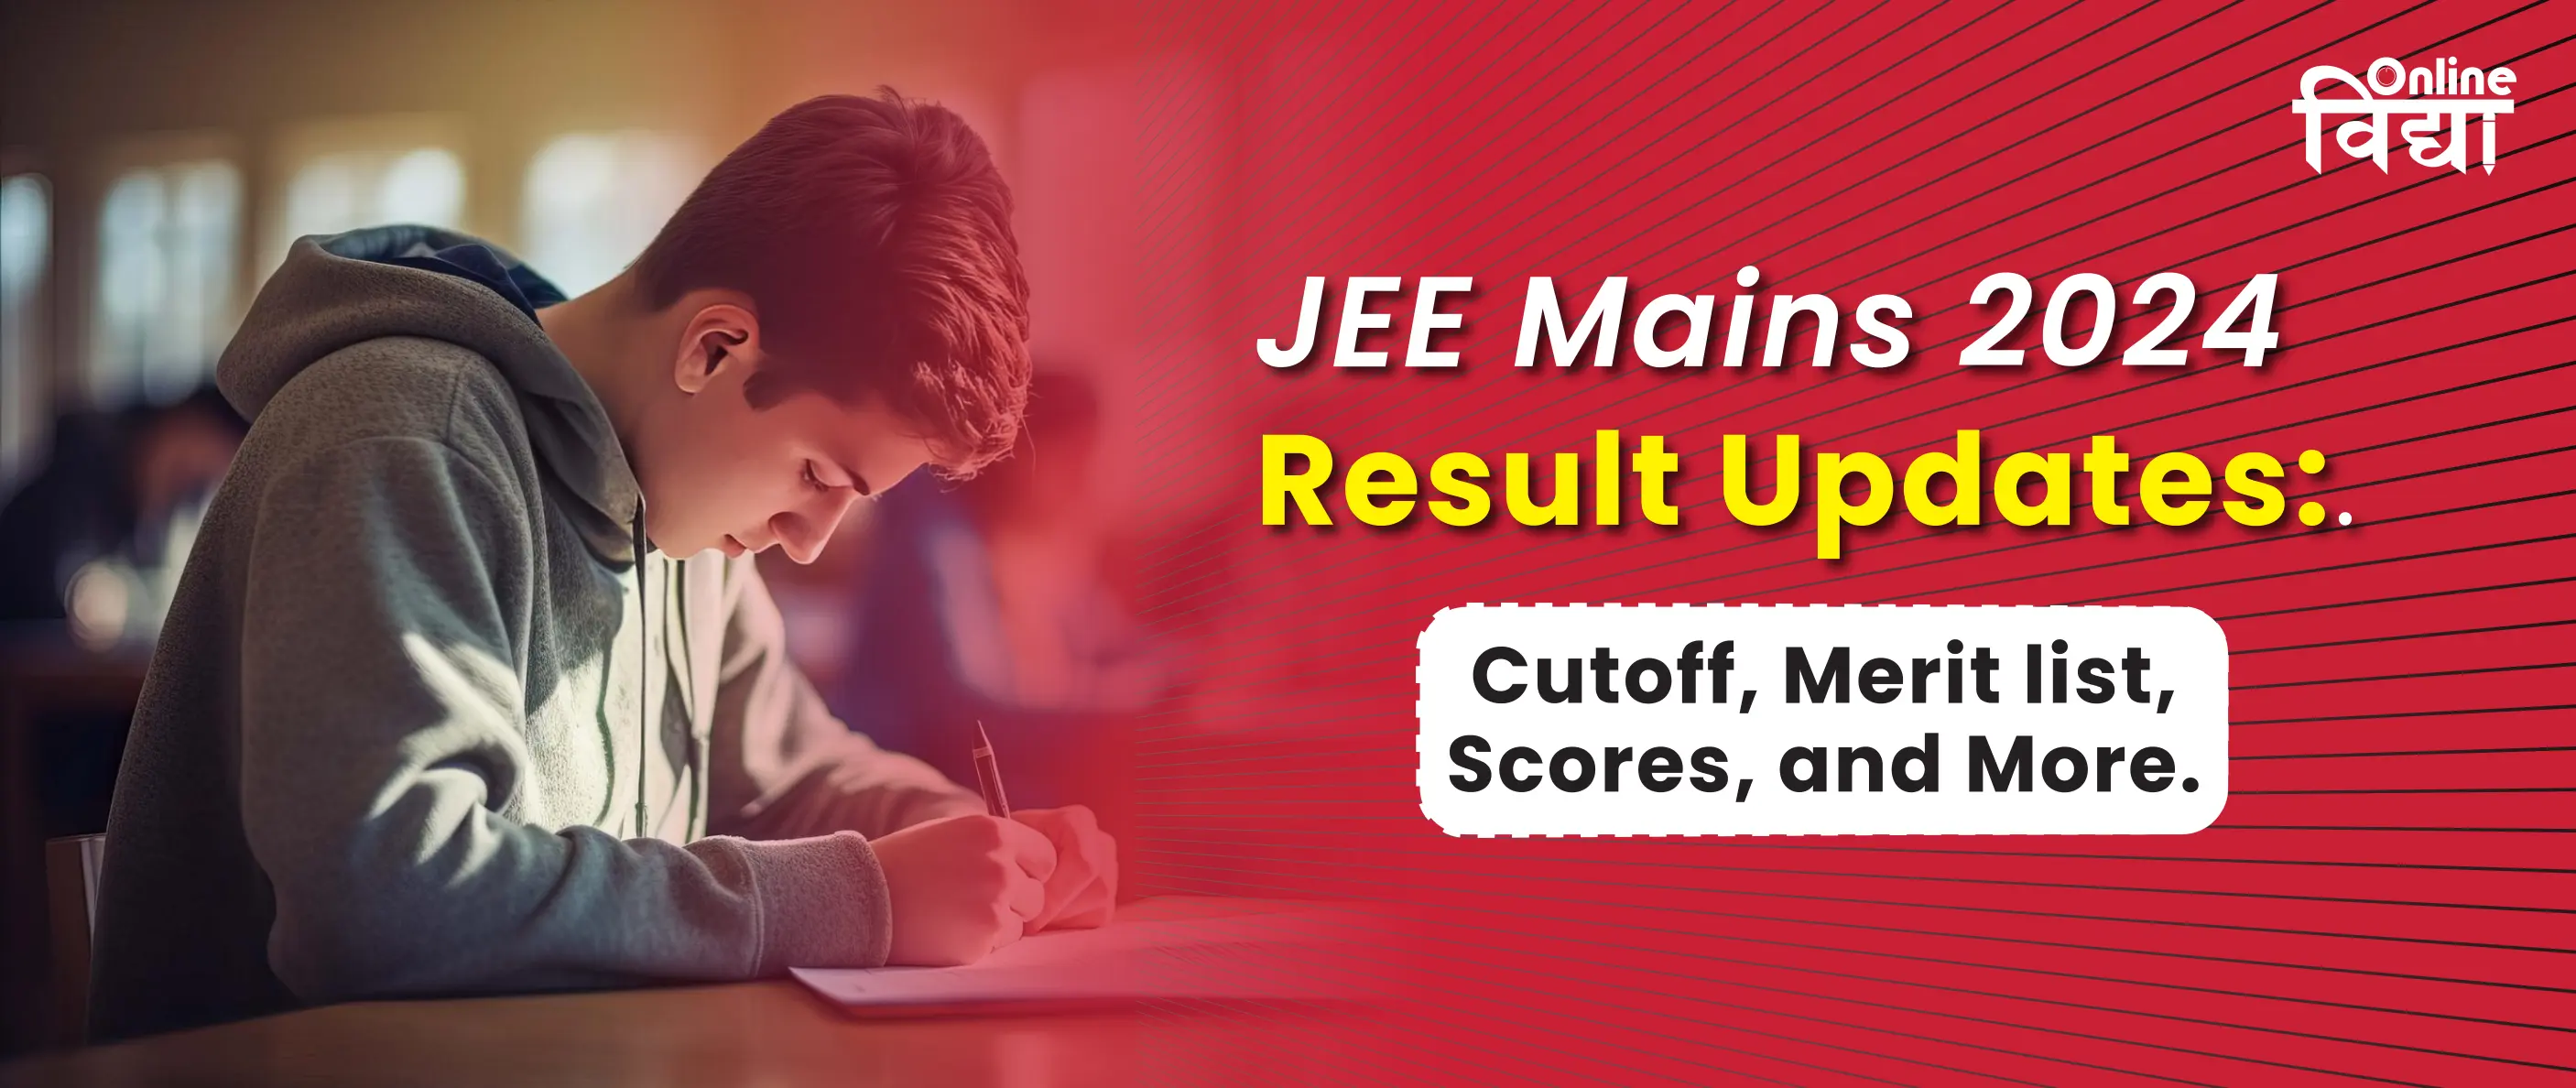 JEE Mains 2024 Result Updates: Cutoff, Merit List, Scores, and More.